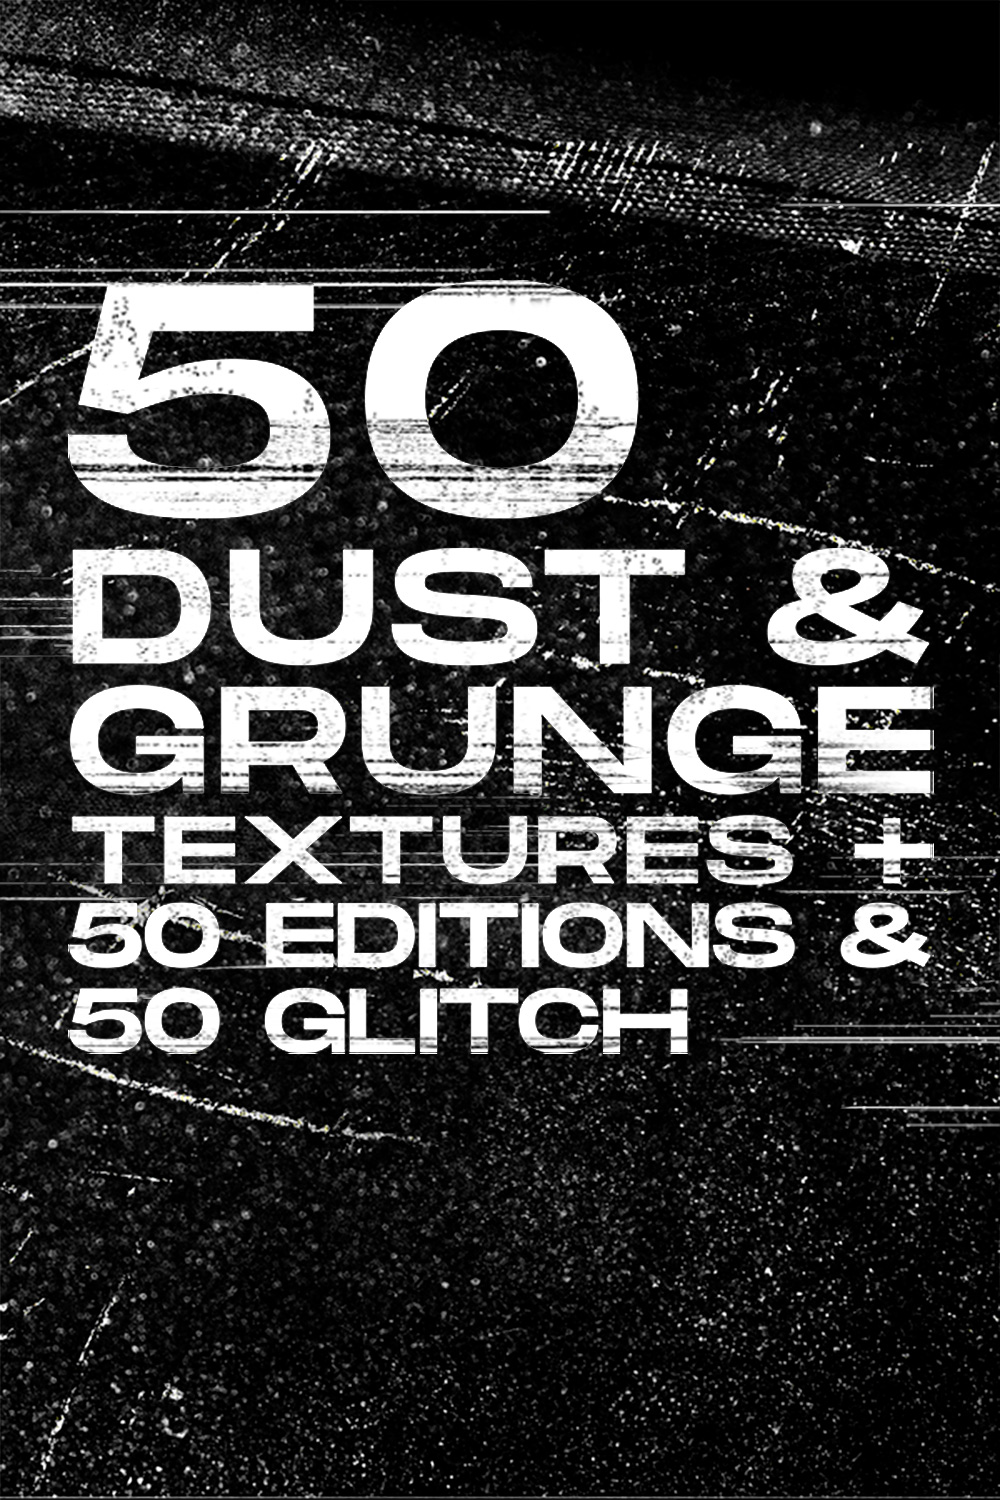 Dust Grunge Textures and Glitch Editions Pinterest image.